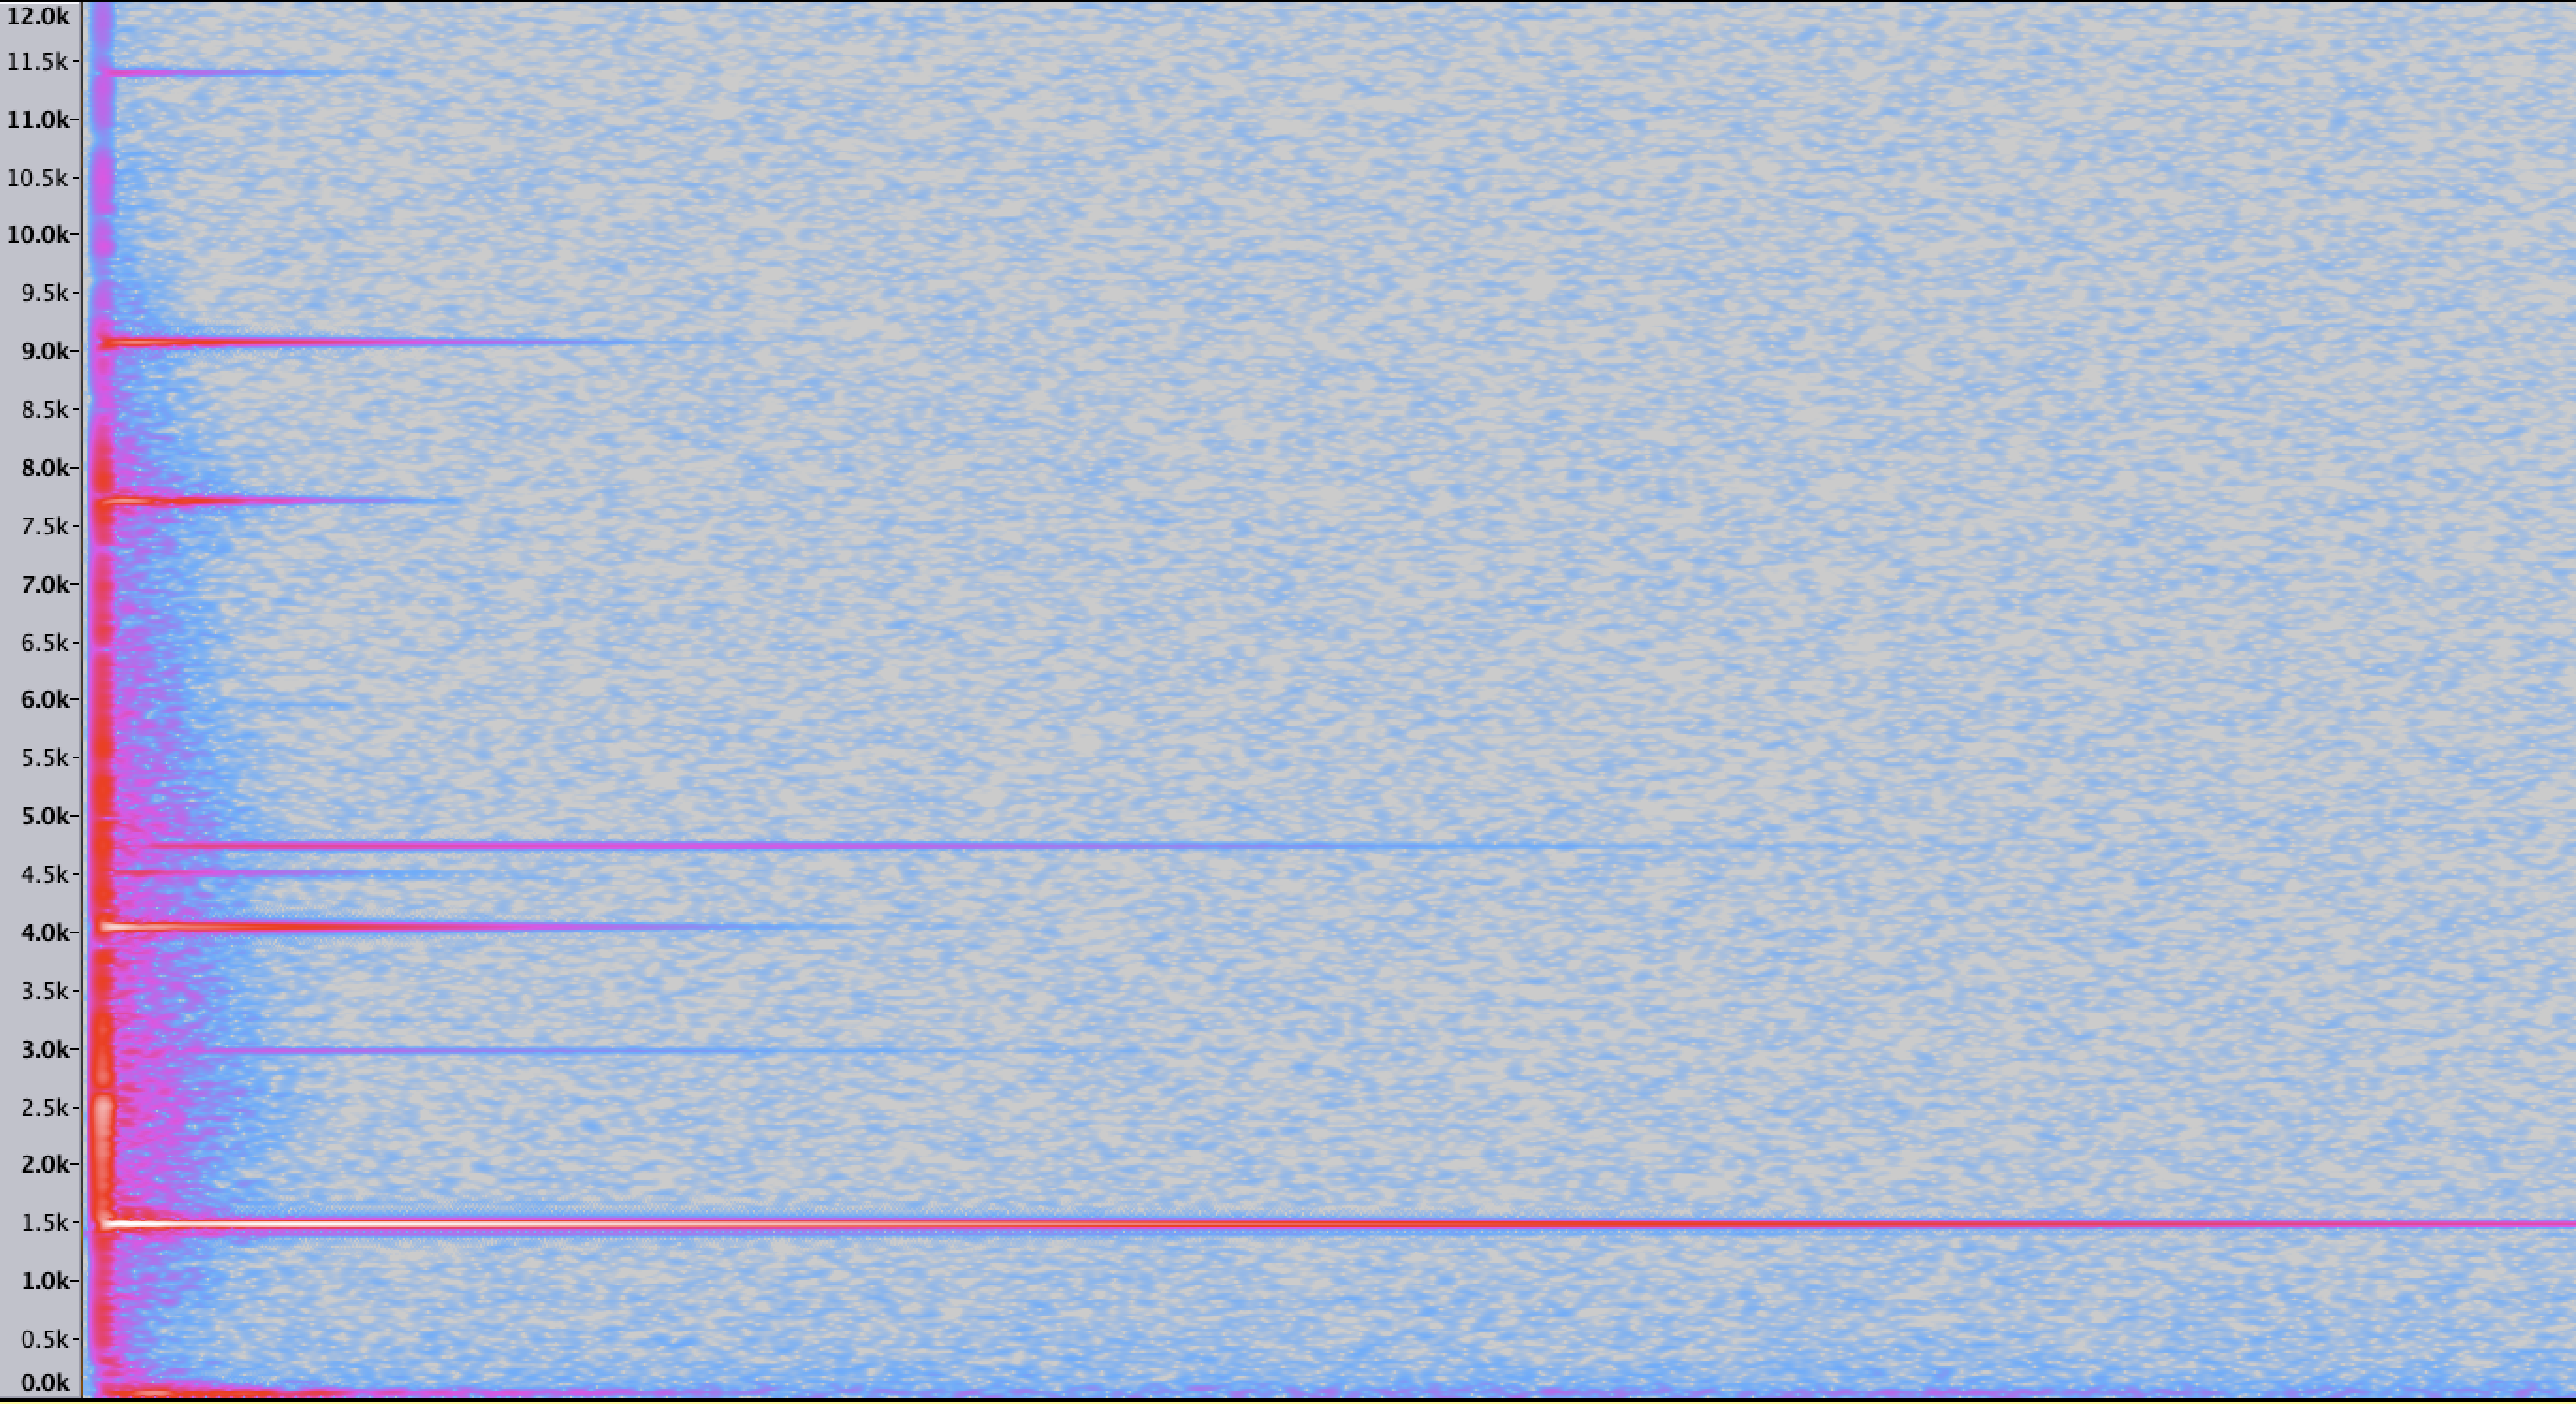 A spectrogram of a xylophone sound